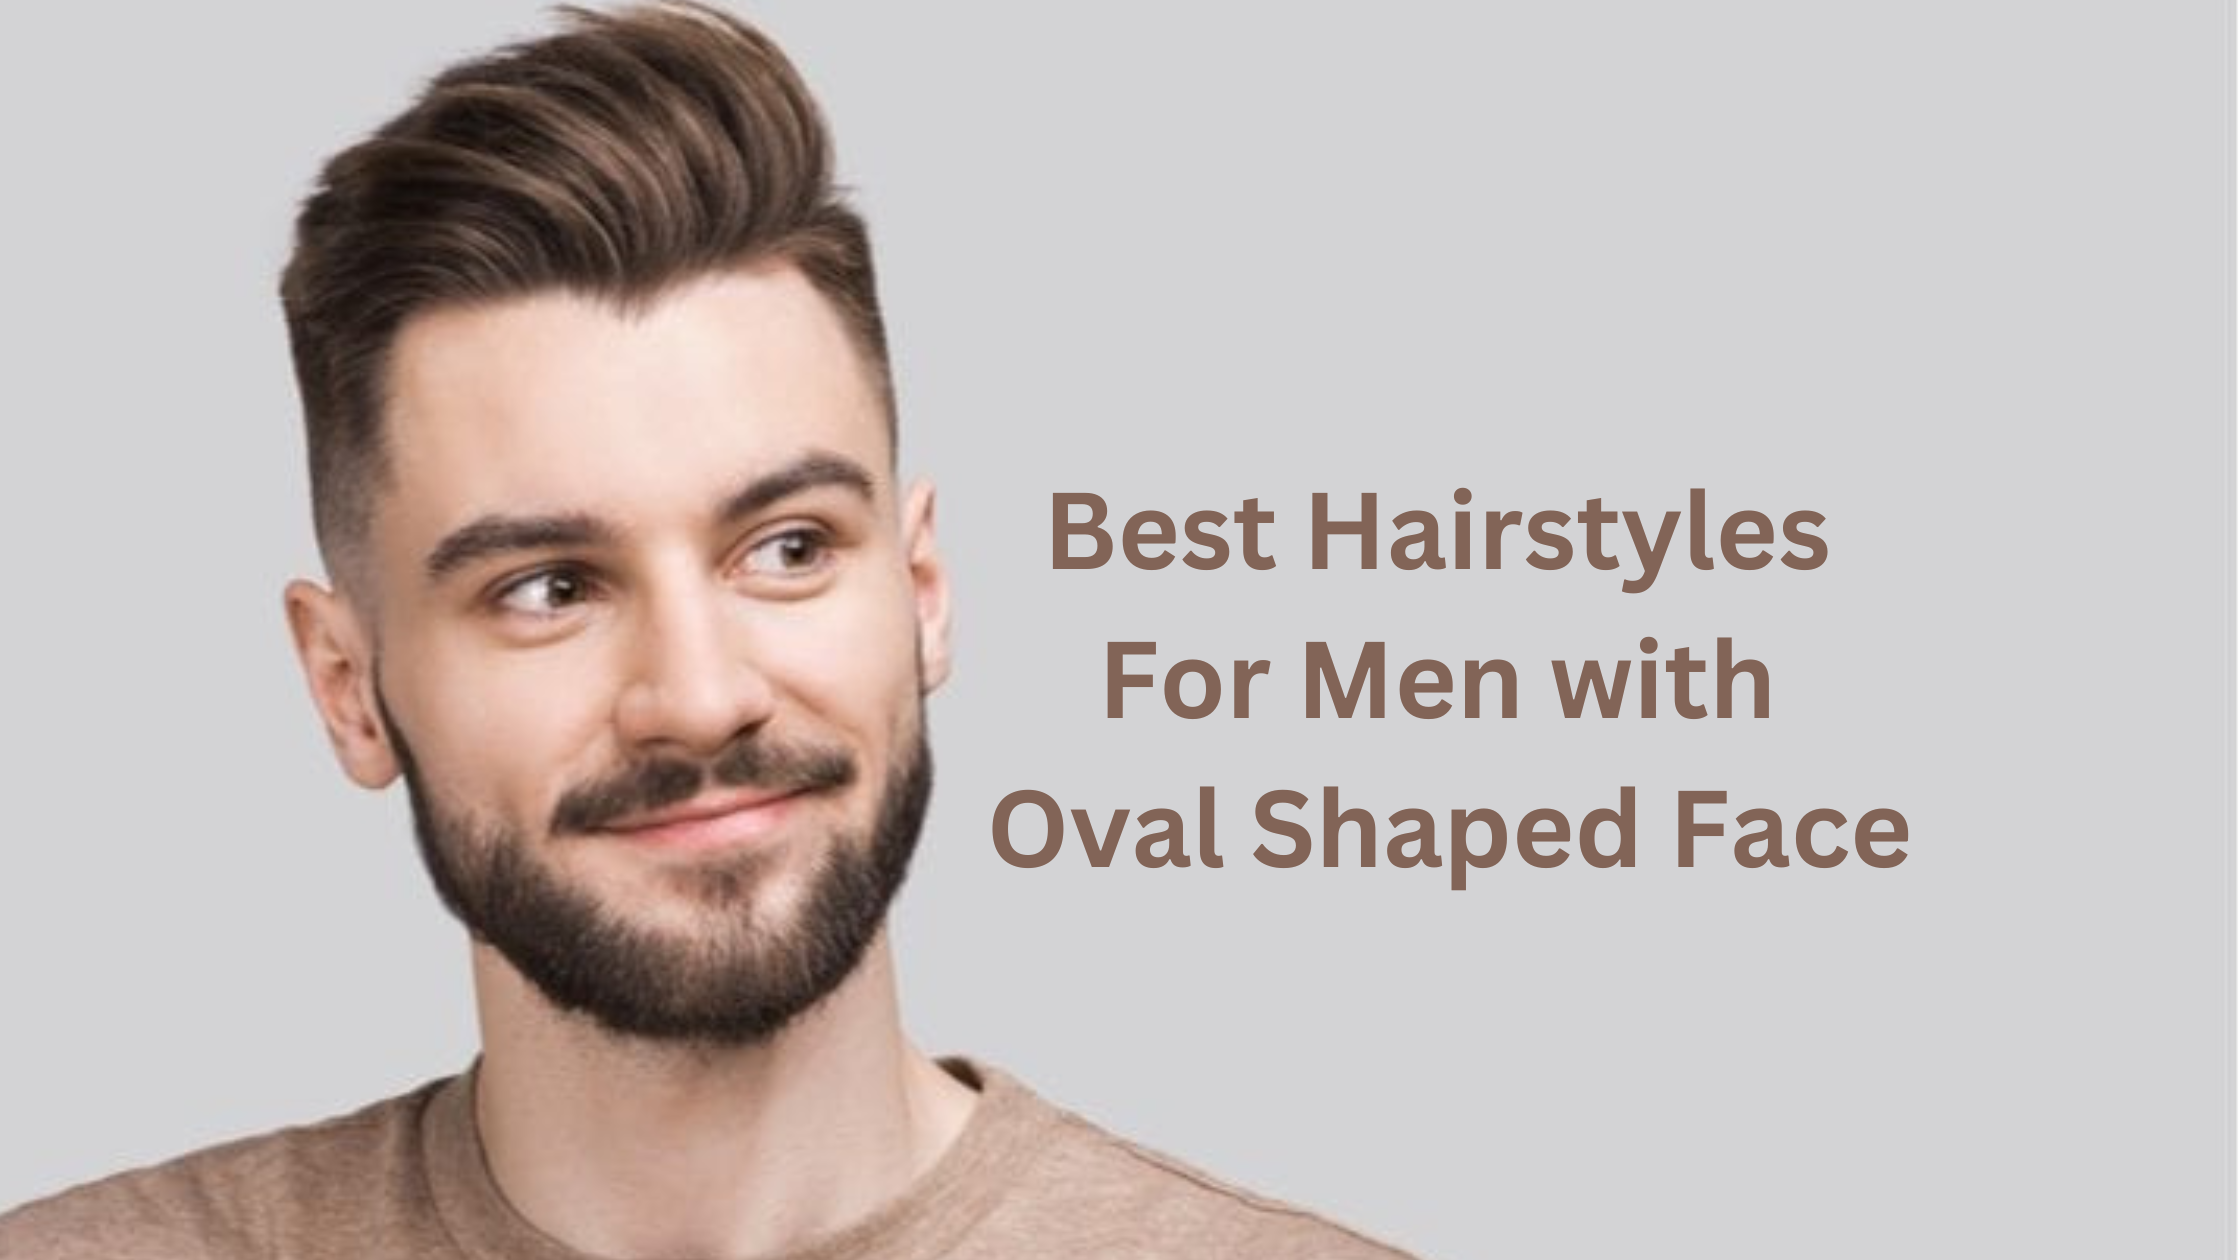 20 Hairstyles for Men With Round Faces | All Things Hair PH